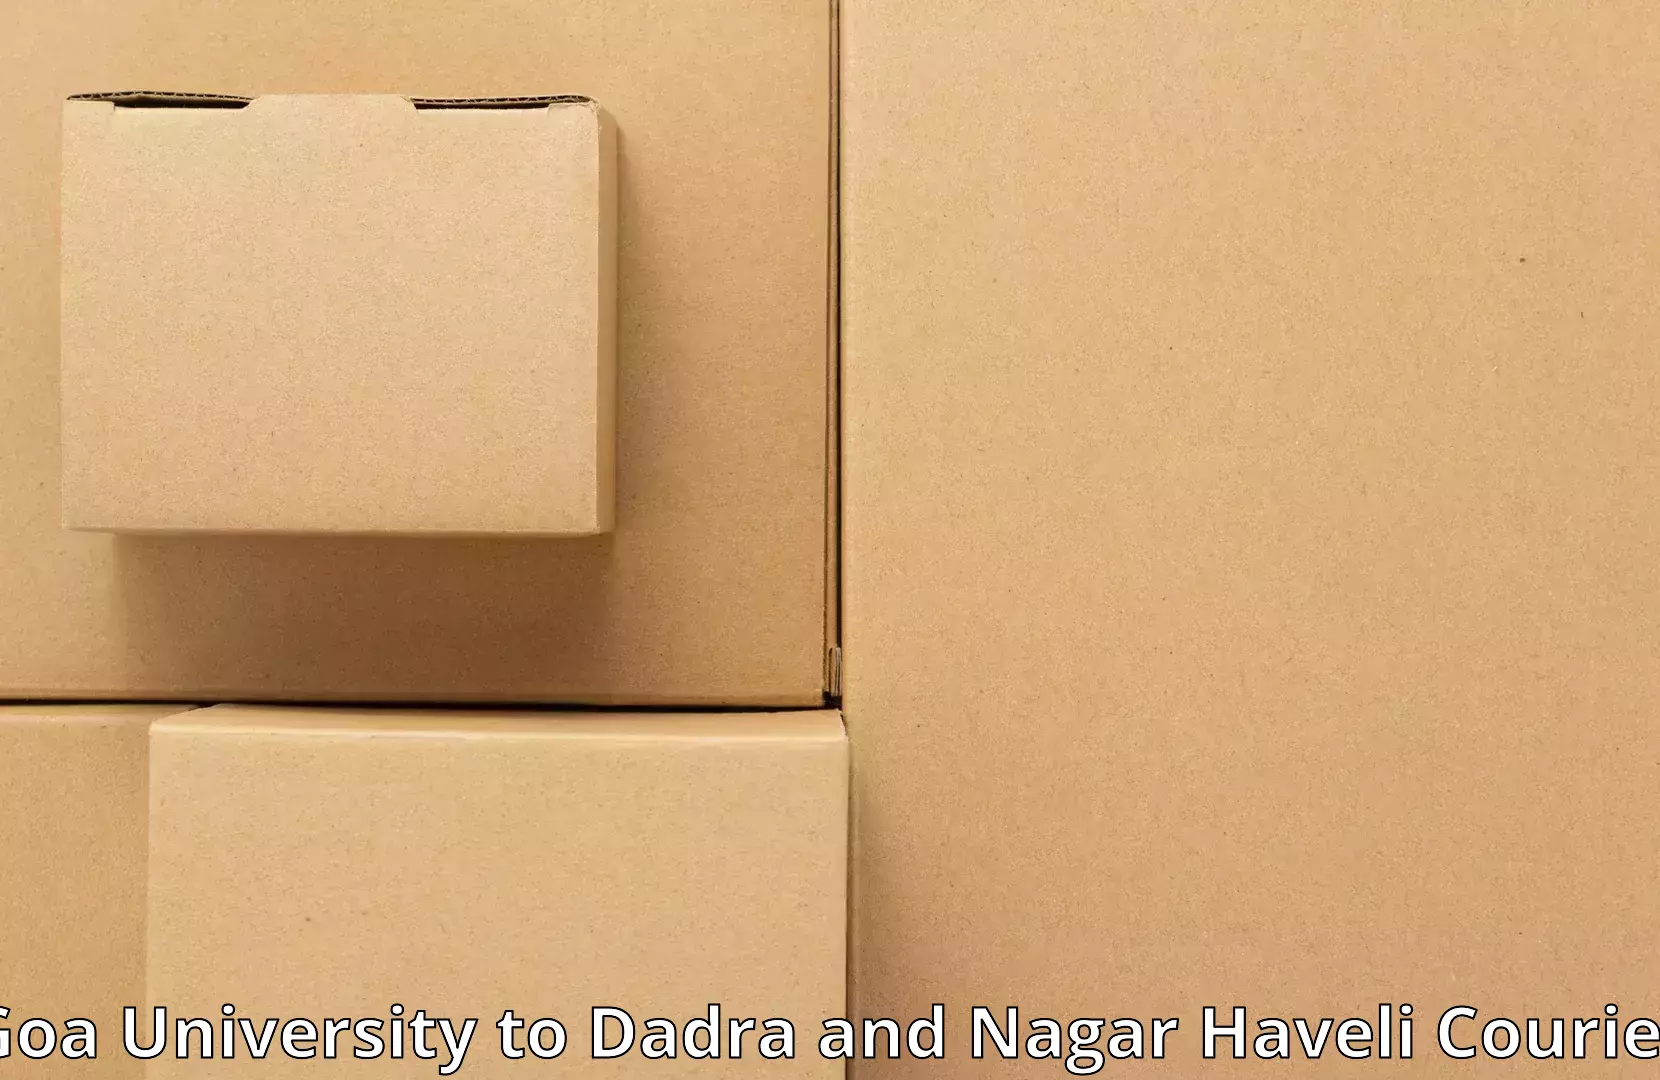 Household goods movers and packers in Goa University to Dadra and Nagar Haveli